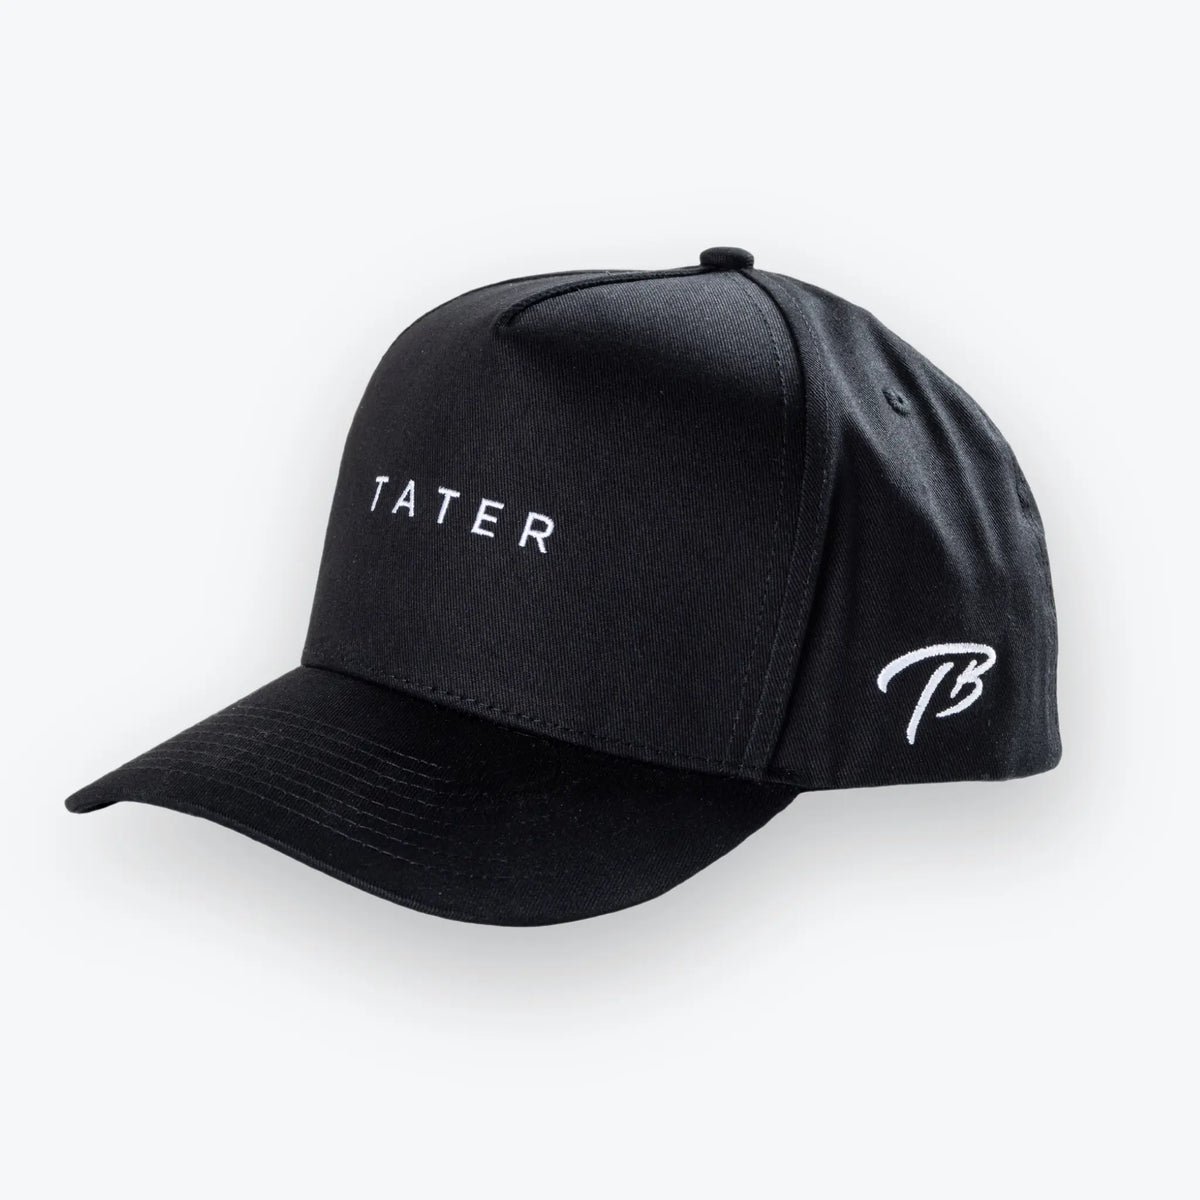 The image features a black snapback hat with the word &quot;TATER&quot; embroidered in white on the front, signifying the Tater Baseball brand. The side of the cap also has the Tater Baseball logo, which appears to be a stylized &quot;TB&quot; in white thread. The hat&#39;s design is minimalistic and contemporary, likely appealing to a wide range of customers, both within the baseball community and those interested in casual athletic wear.